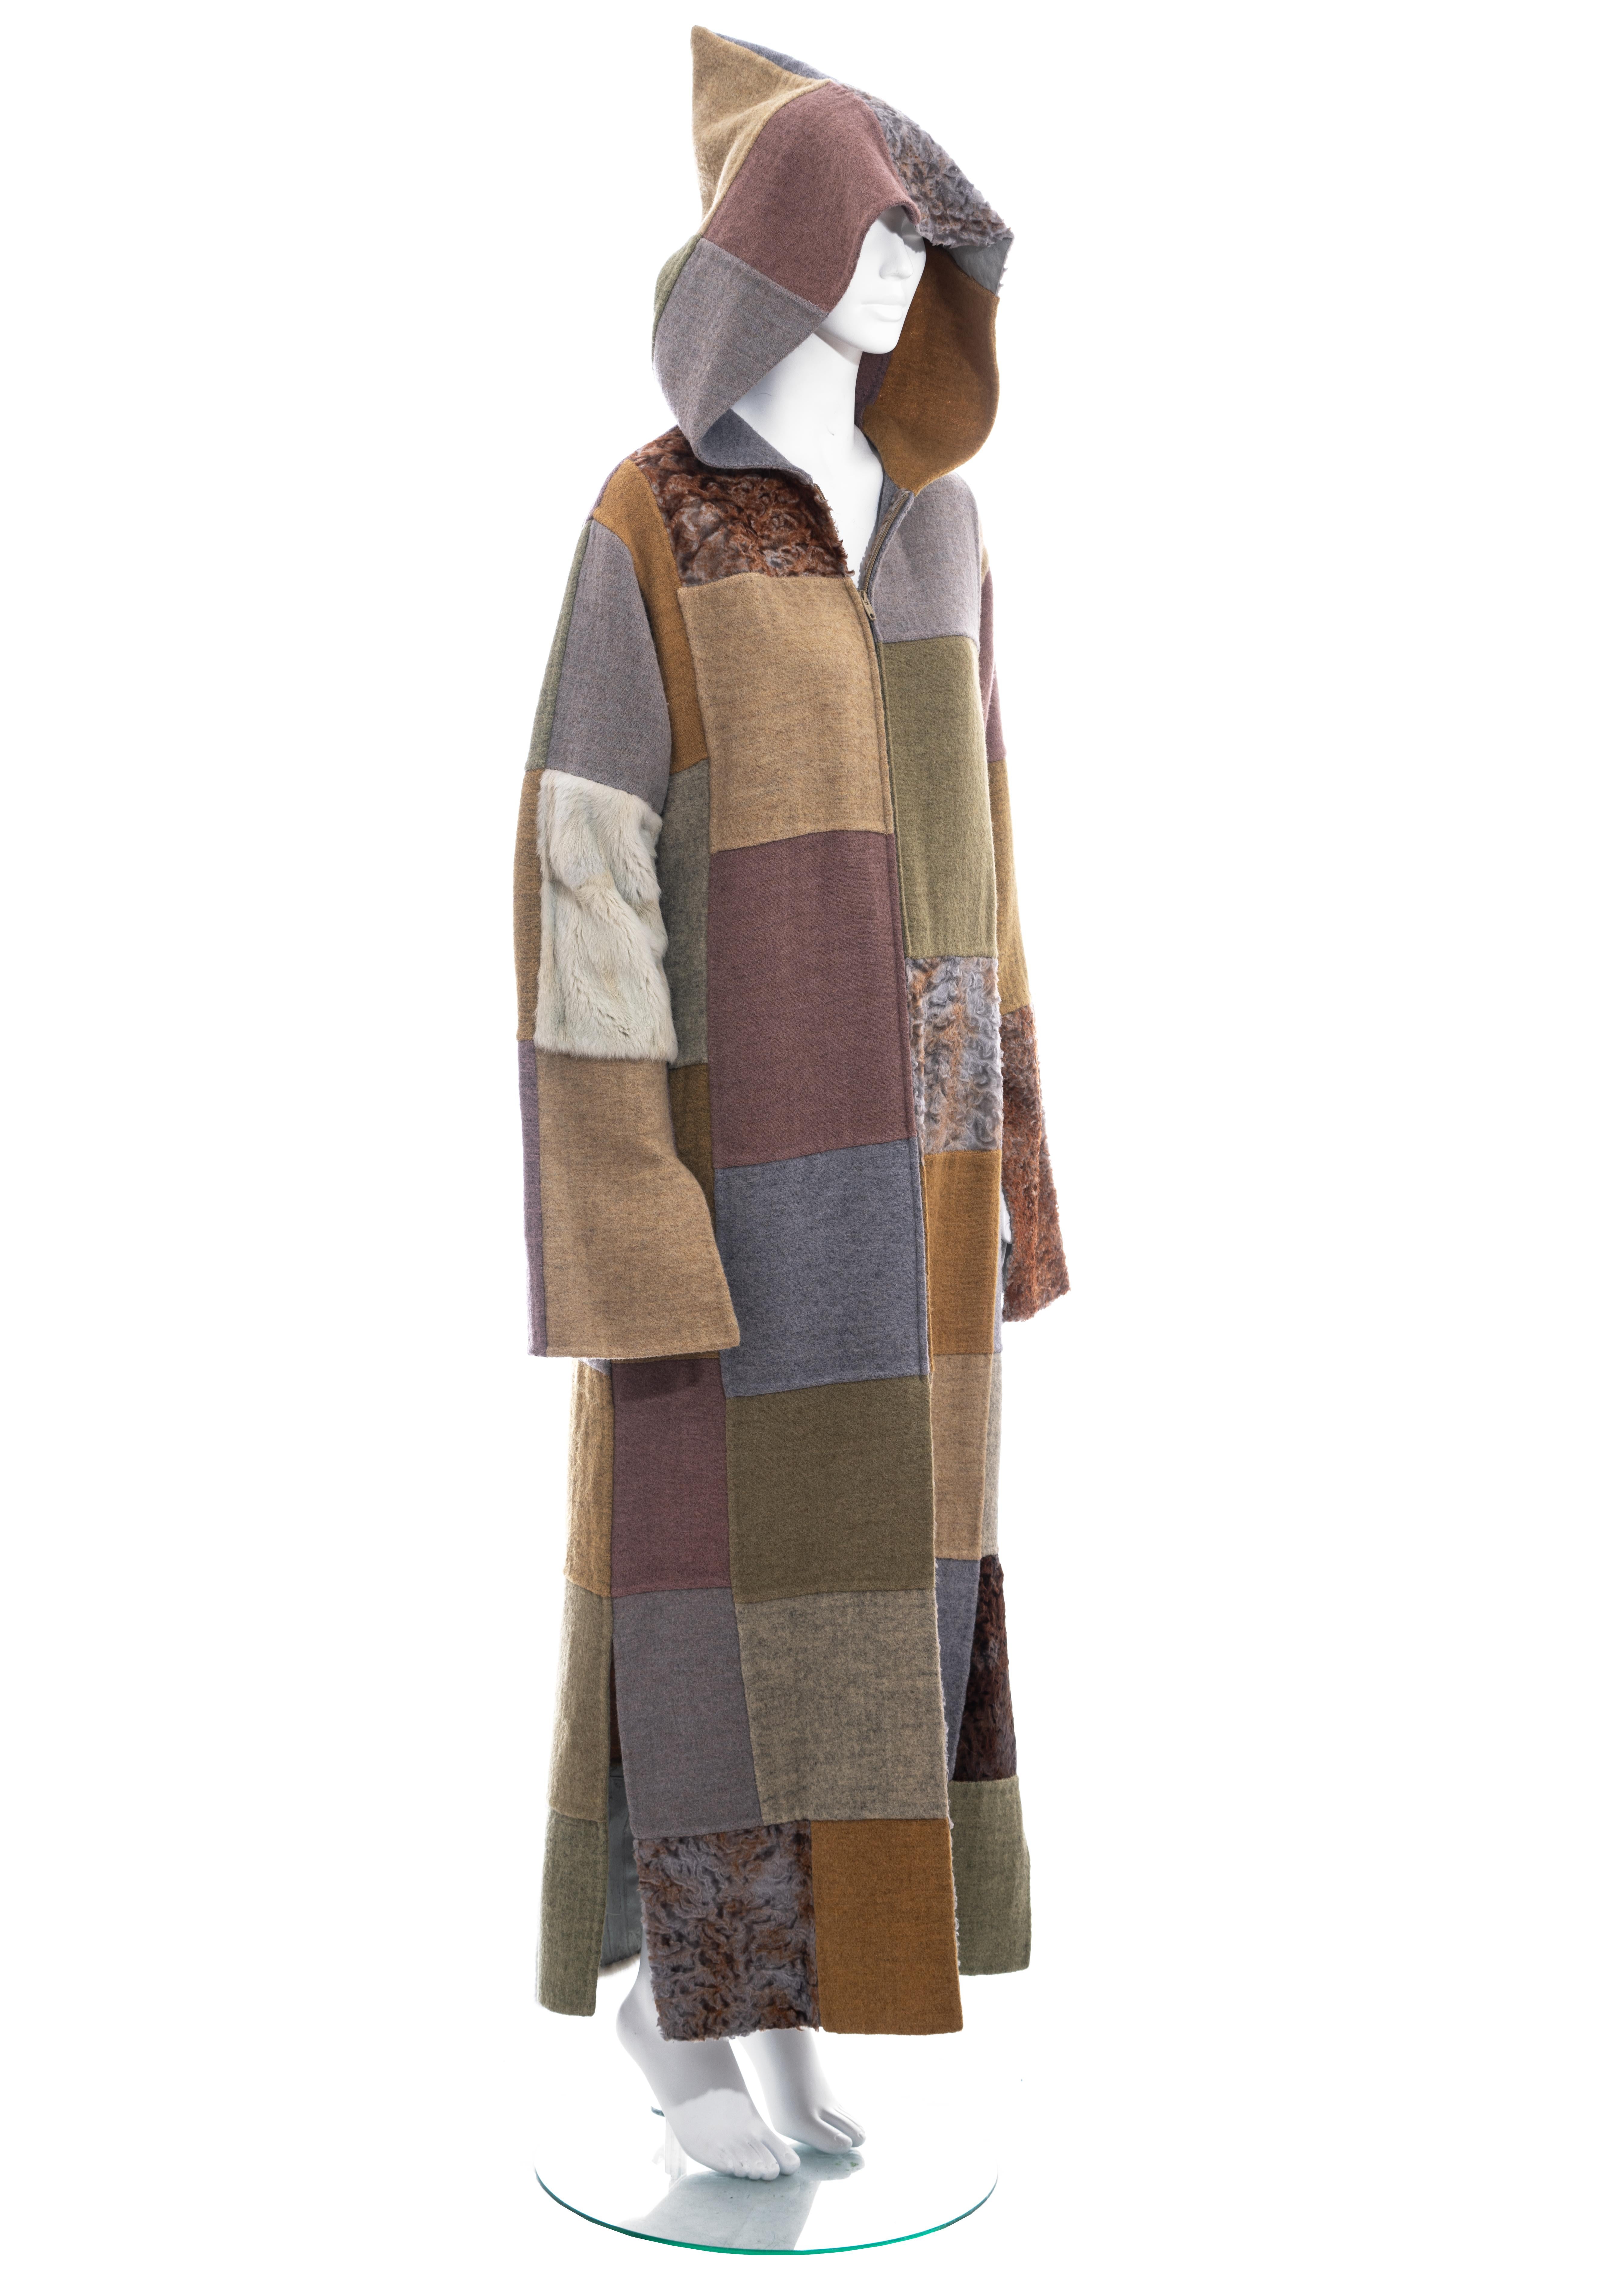 ▪ Fendi multicoloured patchwork maxi coat
▪ Designed by Karl Lagerfeld 
▪ 70% Wool, 20% Alpaca, 10% Nylon
▪ Shearling
▪ Rabbit fur 
▪ Pointed hood 
▪ Doubled ended zip
▪ Slits on cuffs and sides 
▪ Two side pockets 
▪ IT 44 - FR 40 - UK 12 - US 8
▪